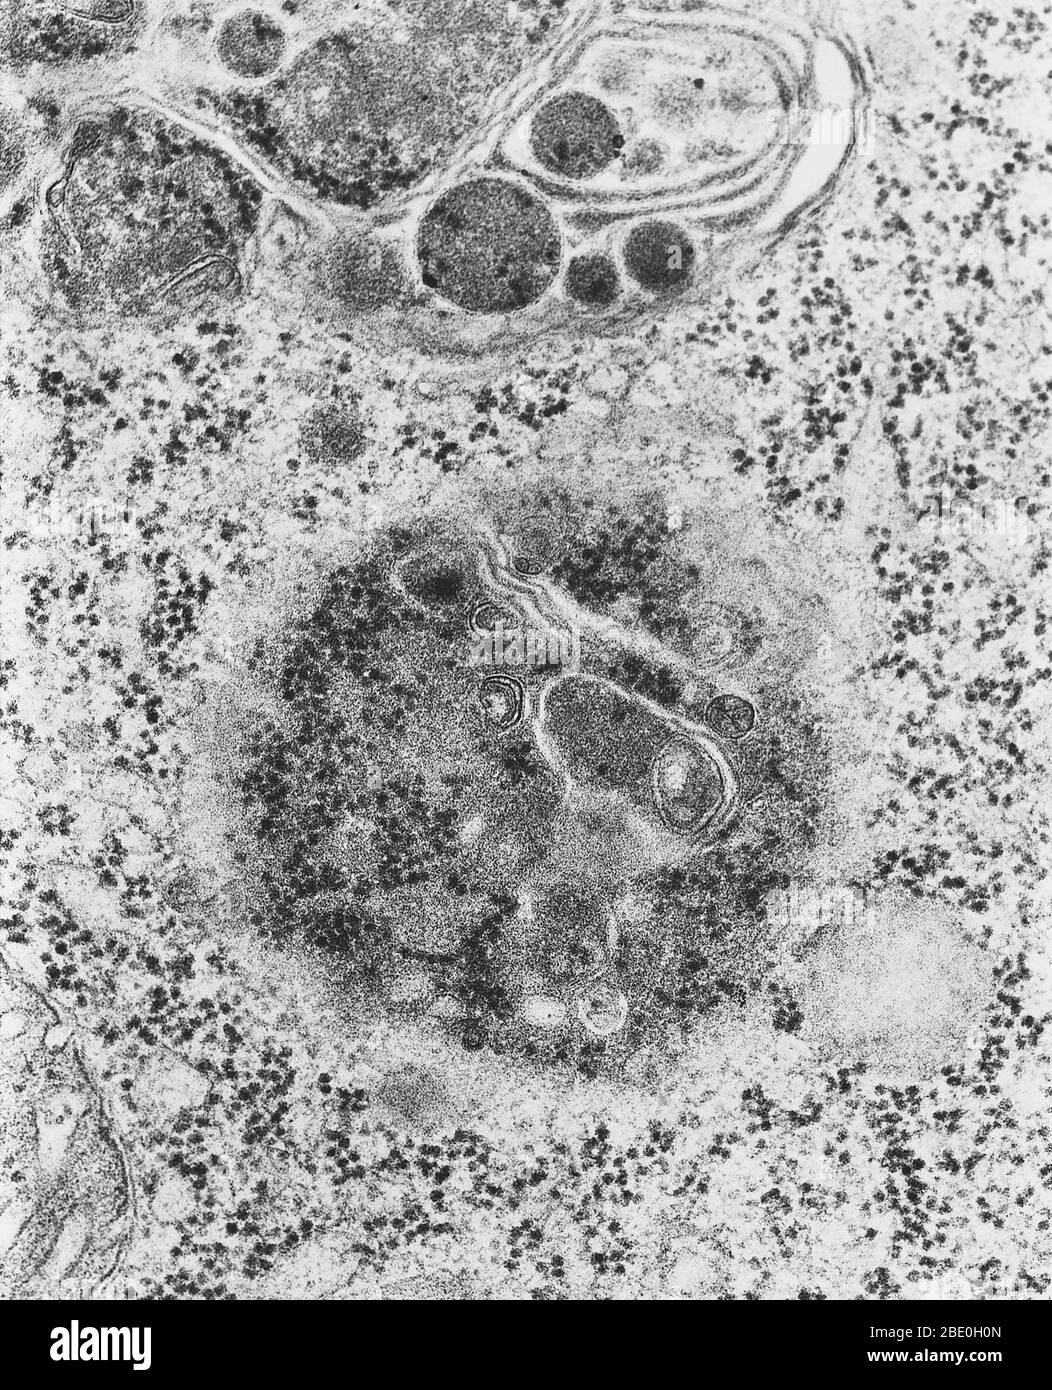 Transmission electron micrograph (TEM) of lysosomes. A lysosome is a membrane-bound organelle found in nearly all animal cells. They are spherical vesicles which contain hydrolytic enzymes that can break down virtually all kinds of biomolecules (waste materials and cellular debris). The name lysosome derives from the Greek words lysis, to separate, and soma, body. They are frequently nicknamed 'suicide-bags' or 'suicide-sacs' by cell biologists due to their role in autolysis, more commonly known as self-digestion, refers to the destruction of a cell through the action of its own enzymes. Magni Stock Photo